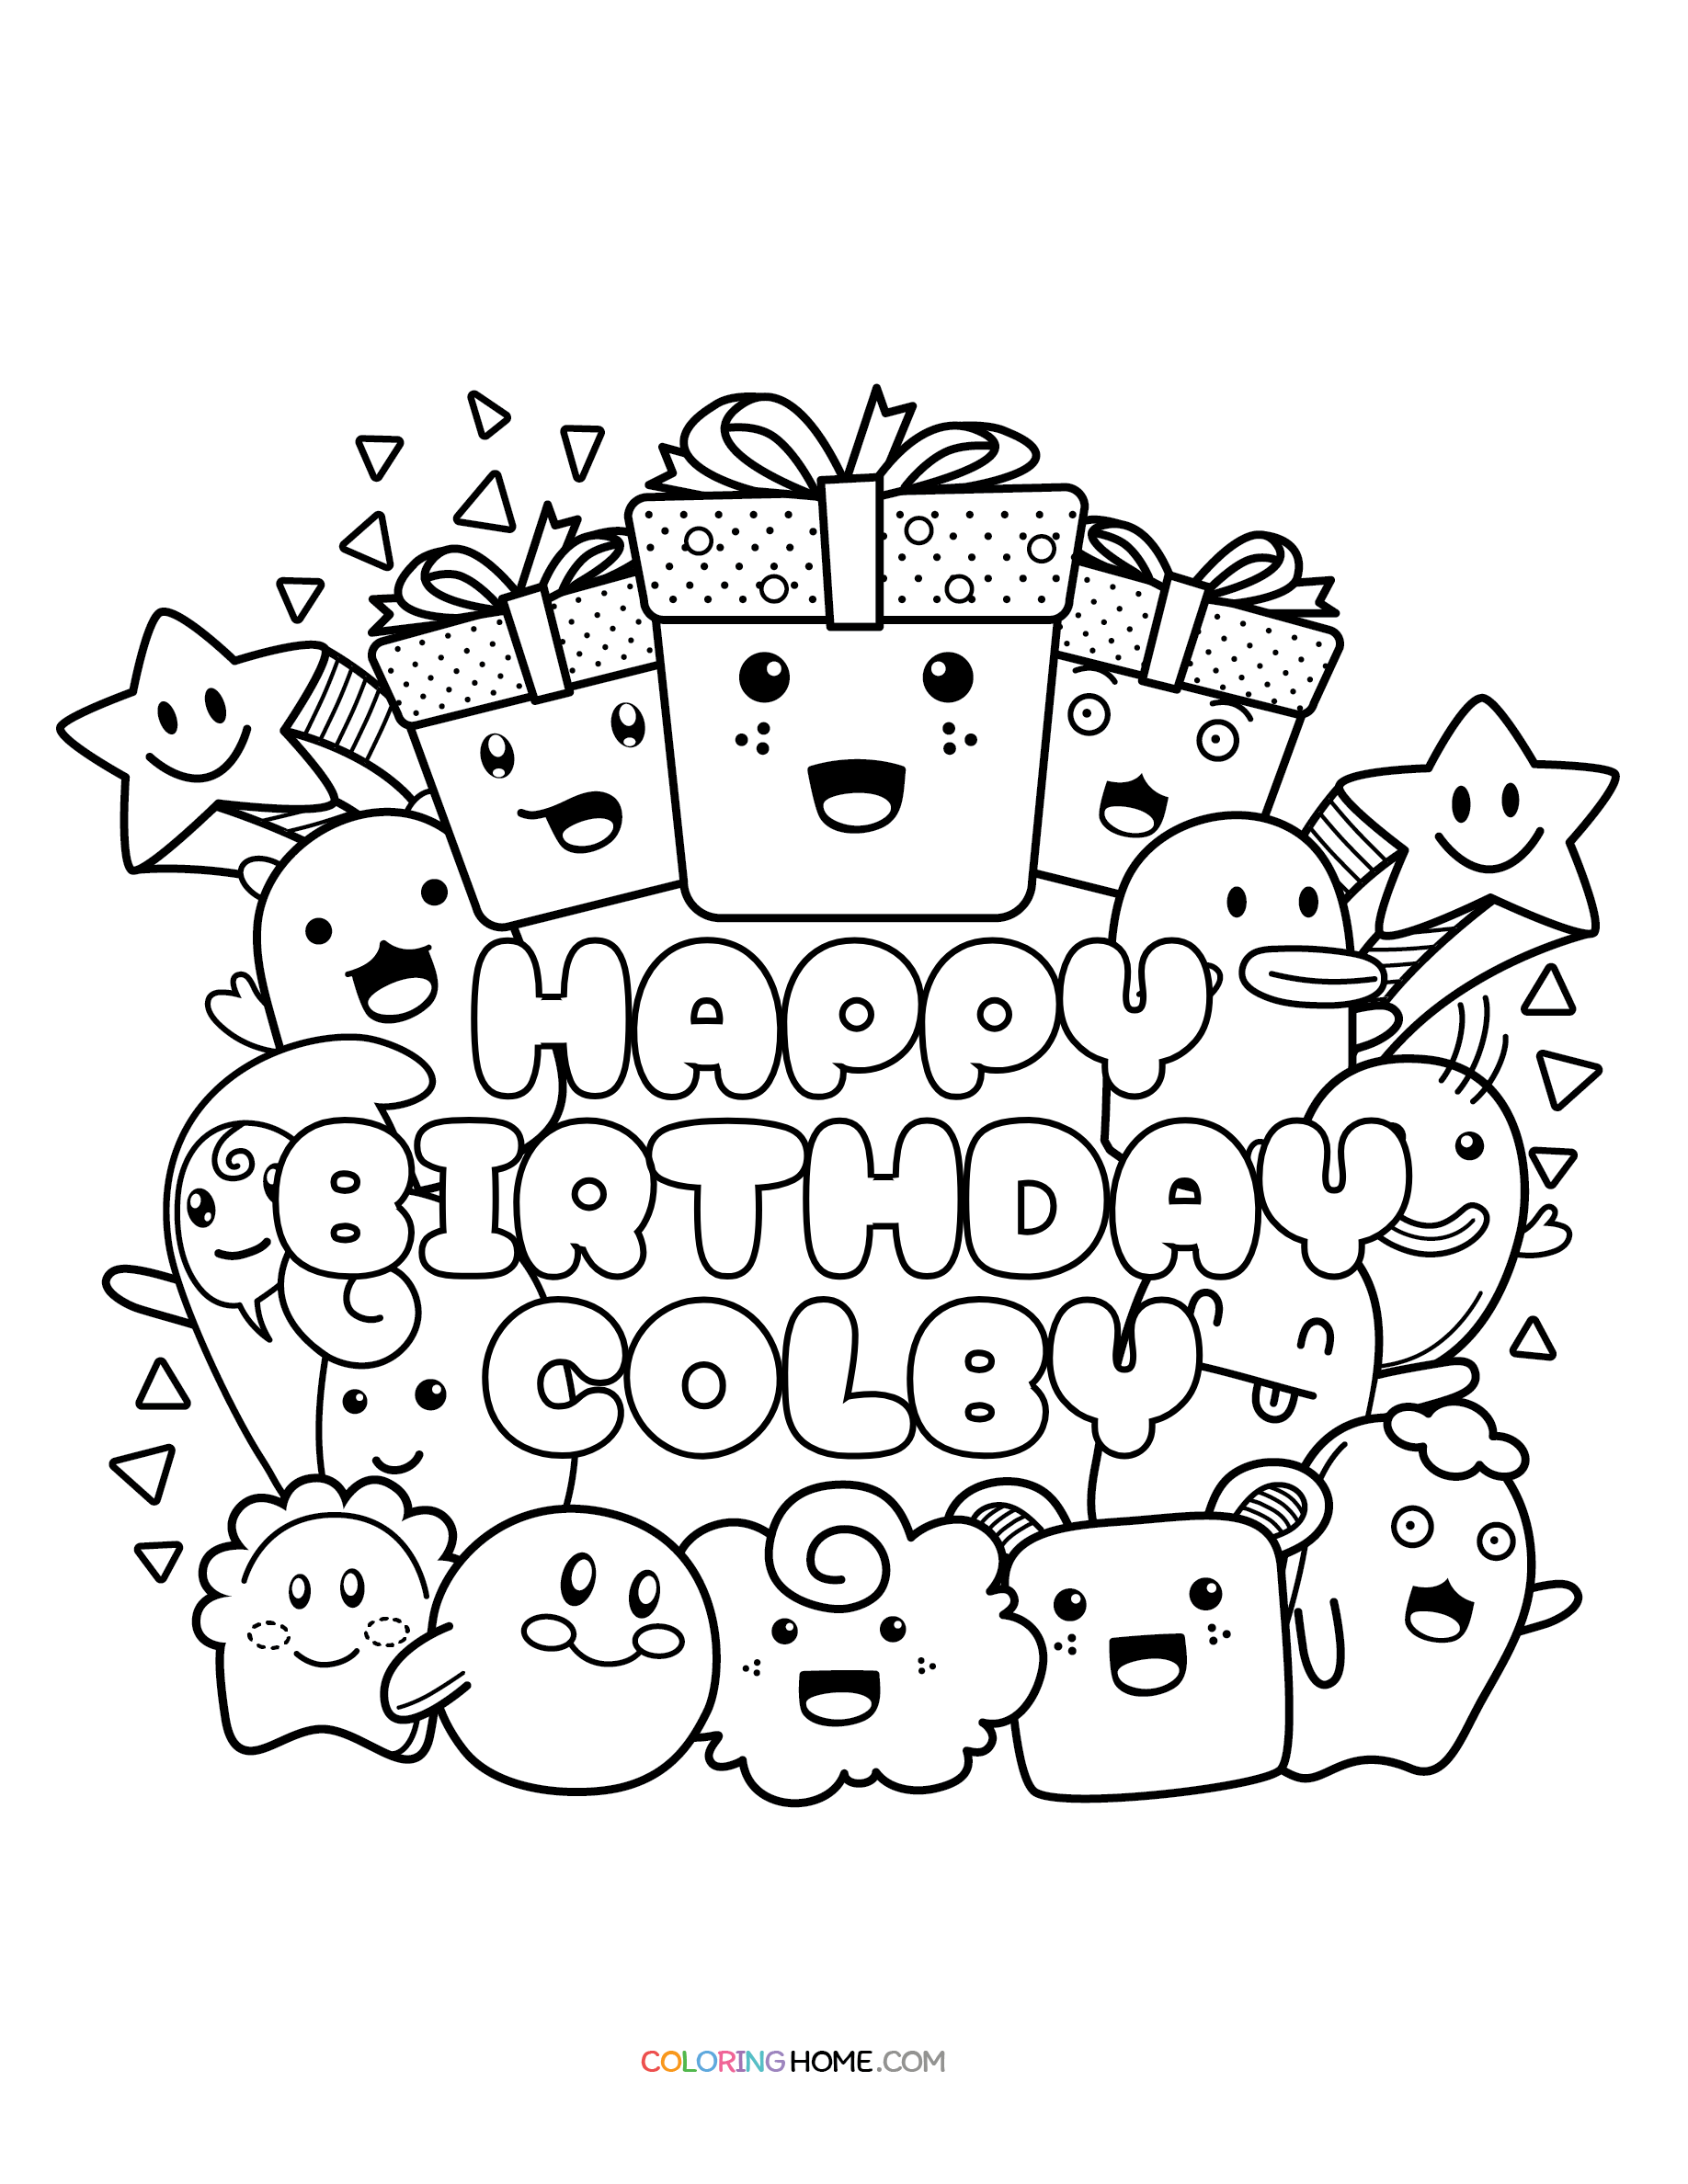 Happy Birthday Colby coloring page